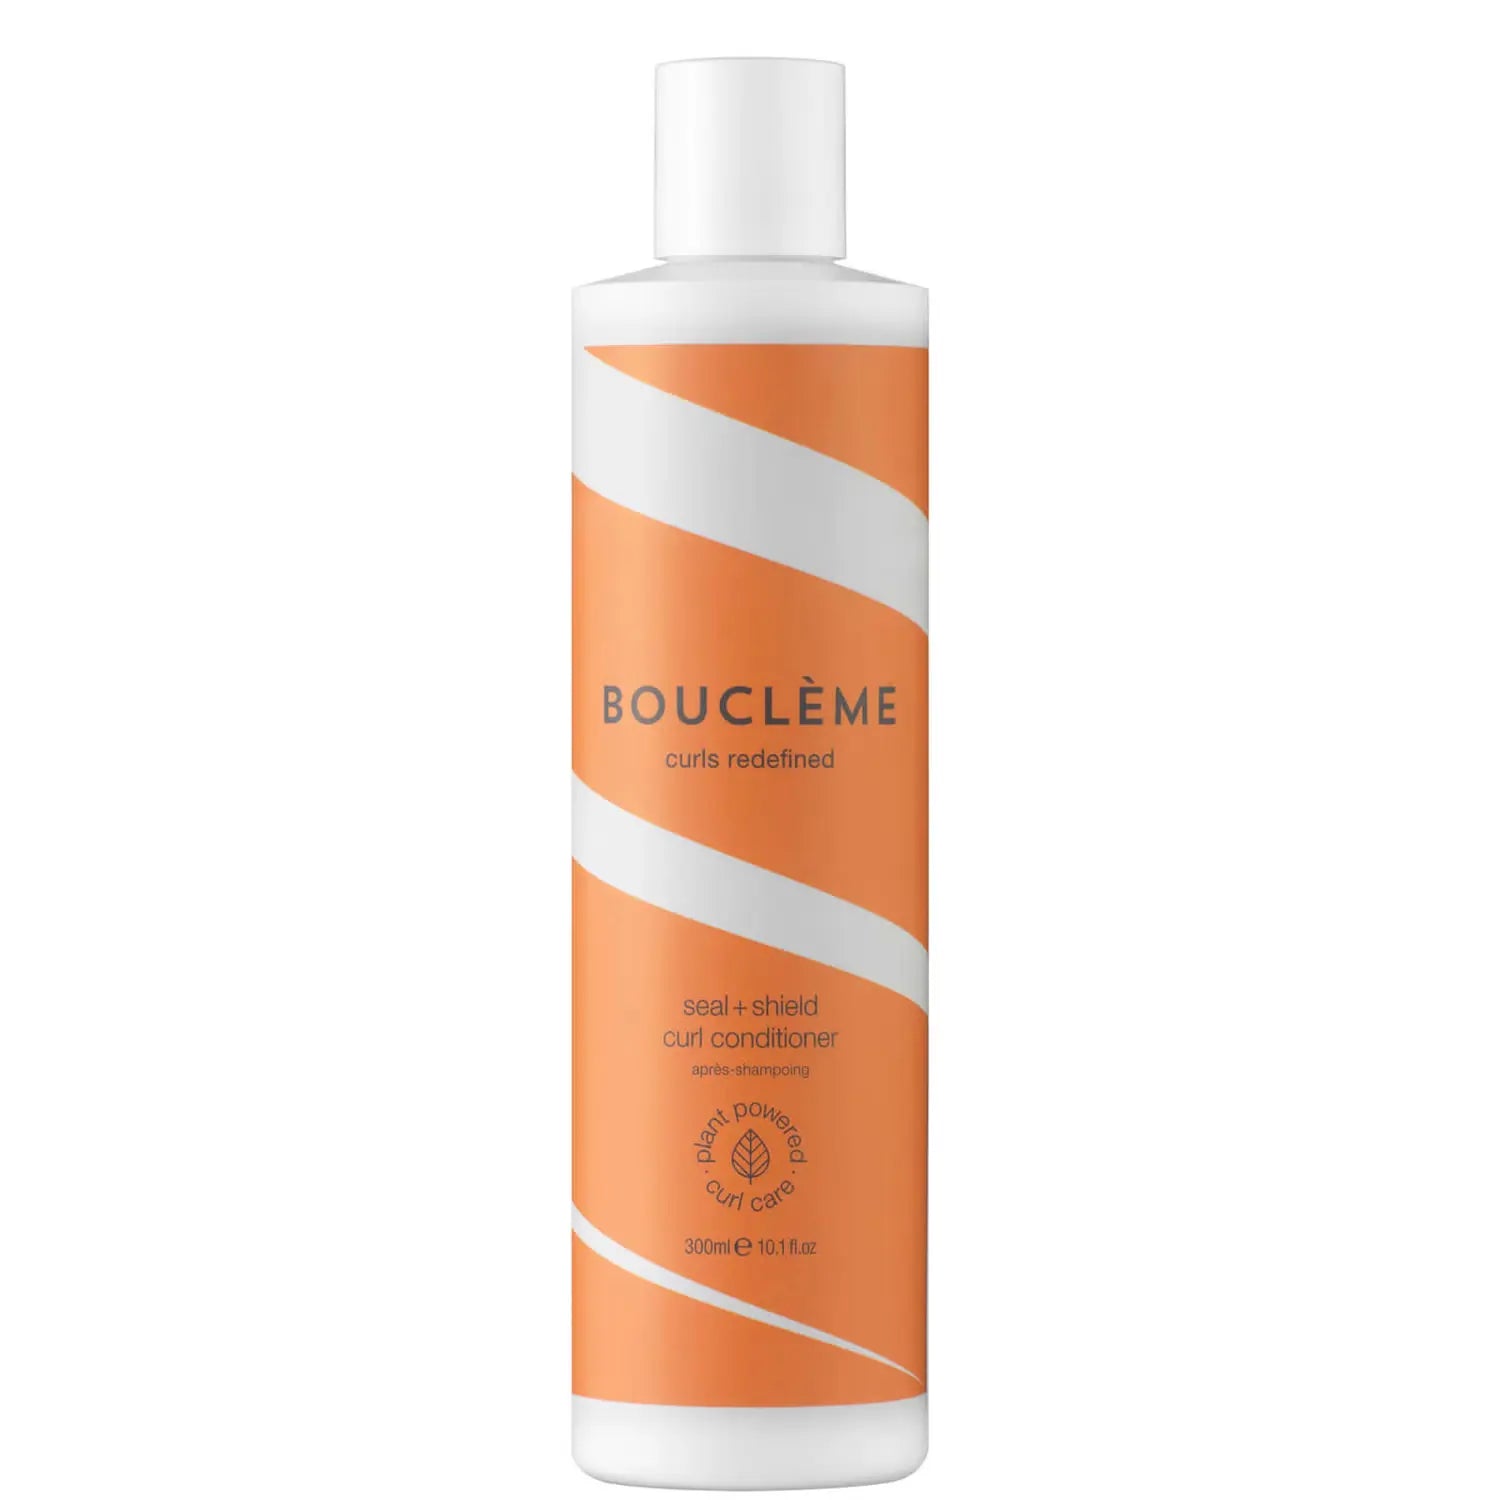 Boucléme Seal + Shield Curl conditioner 300ml